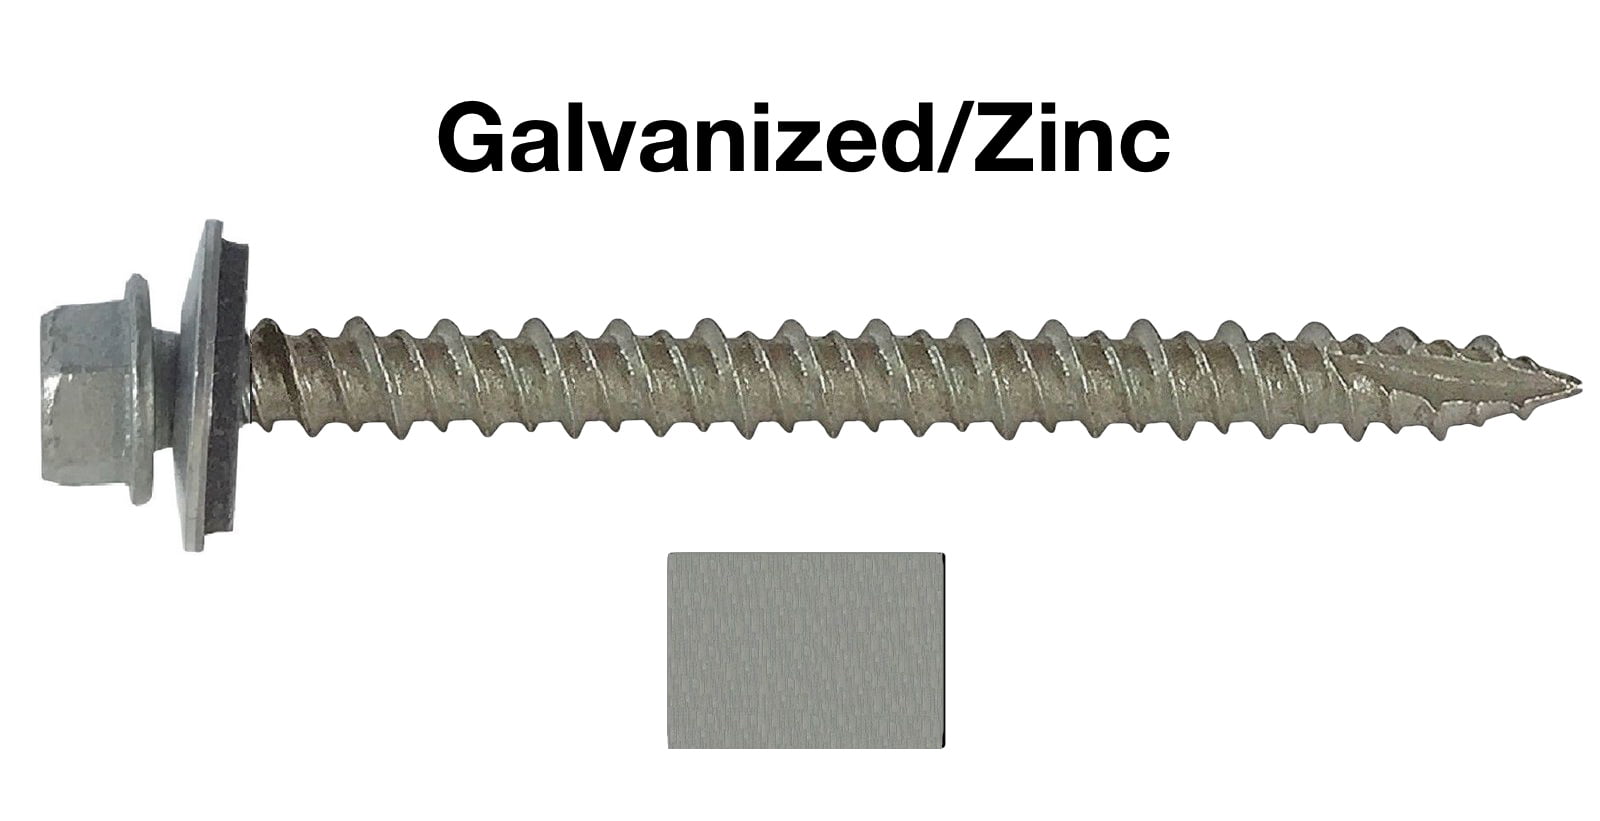 12 X 1 1/4" Charcoal Metal Roofing/Siding Screws 